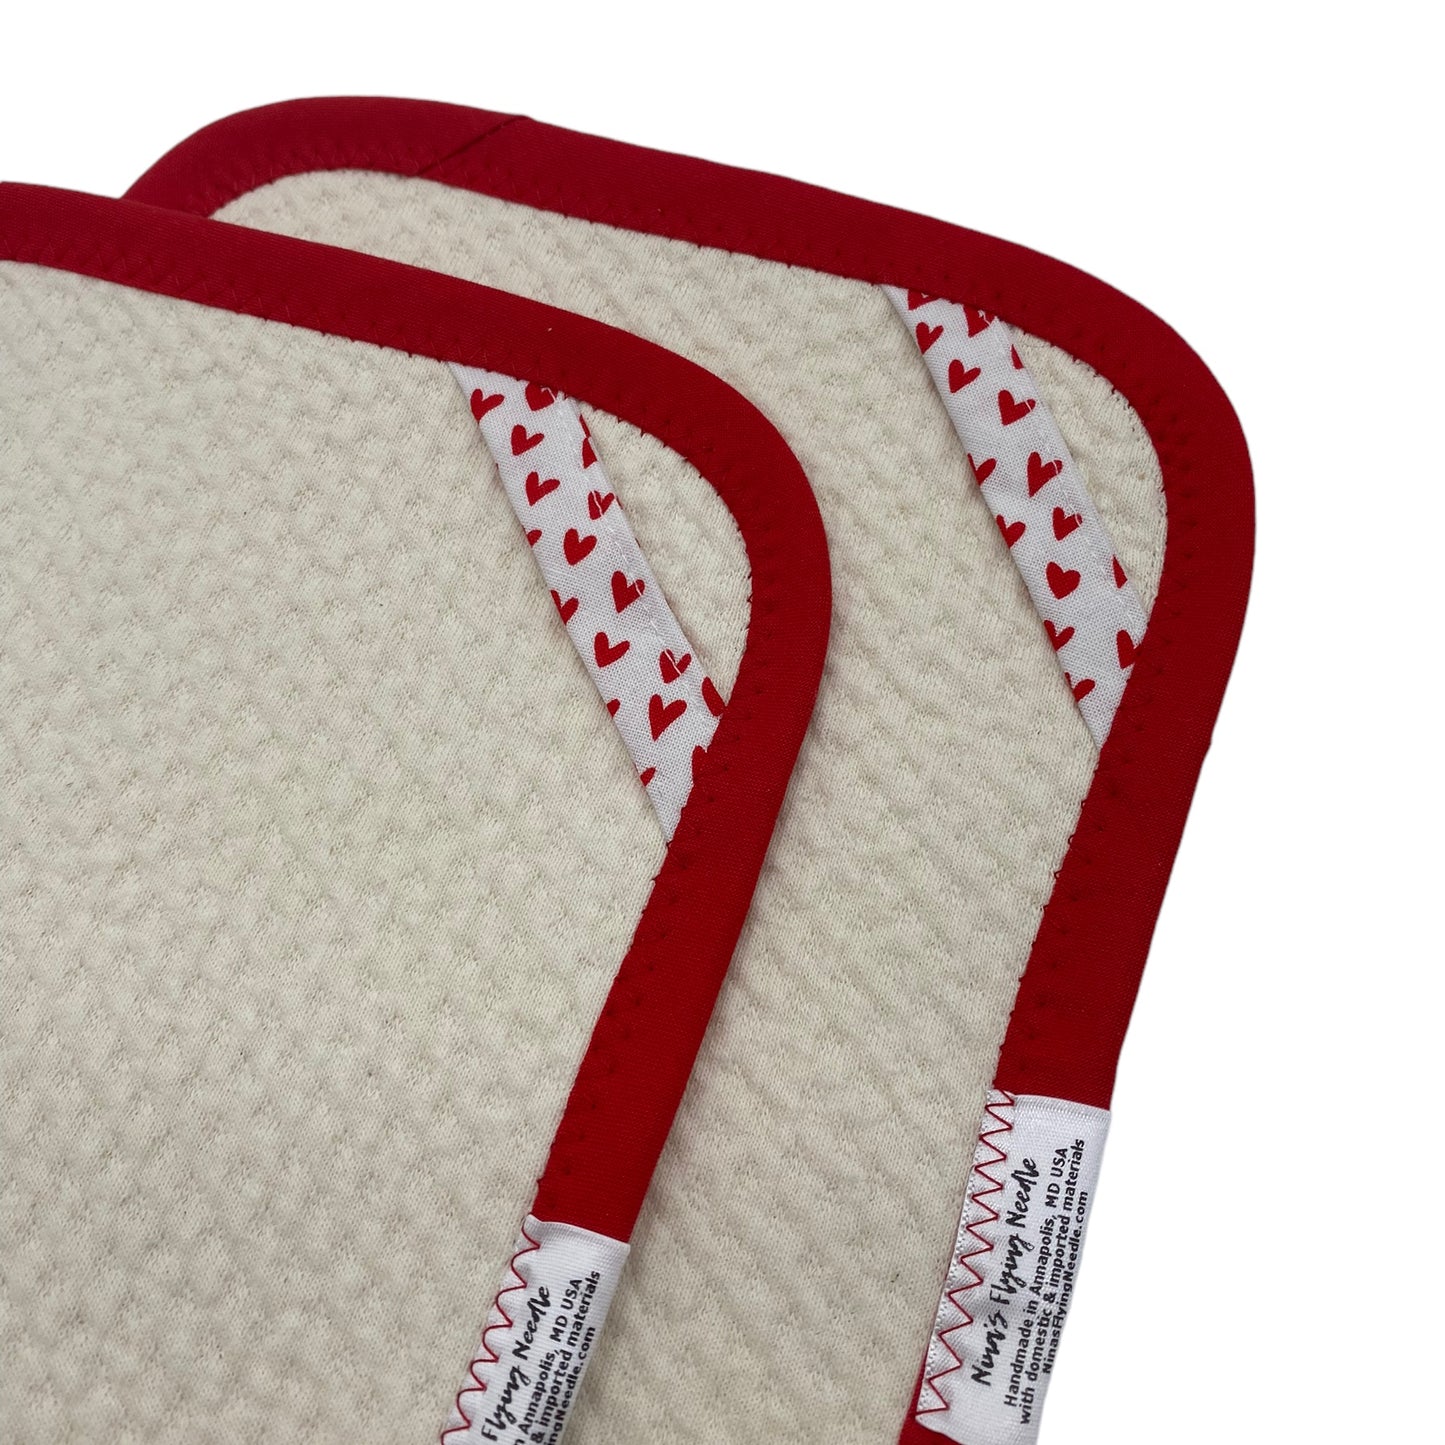 Set of 2 Reusable STANDARD Paper Towels - Red Solid Hearts